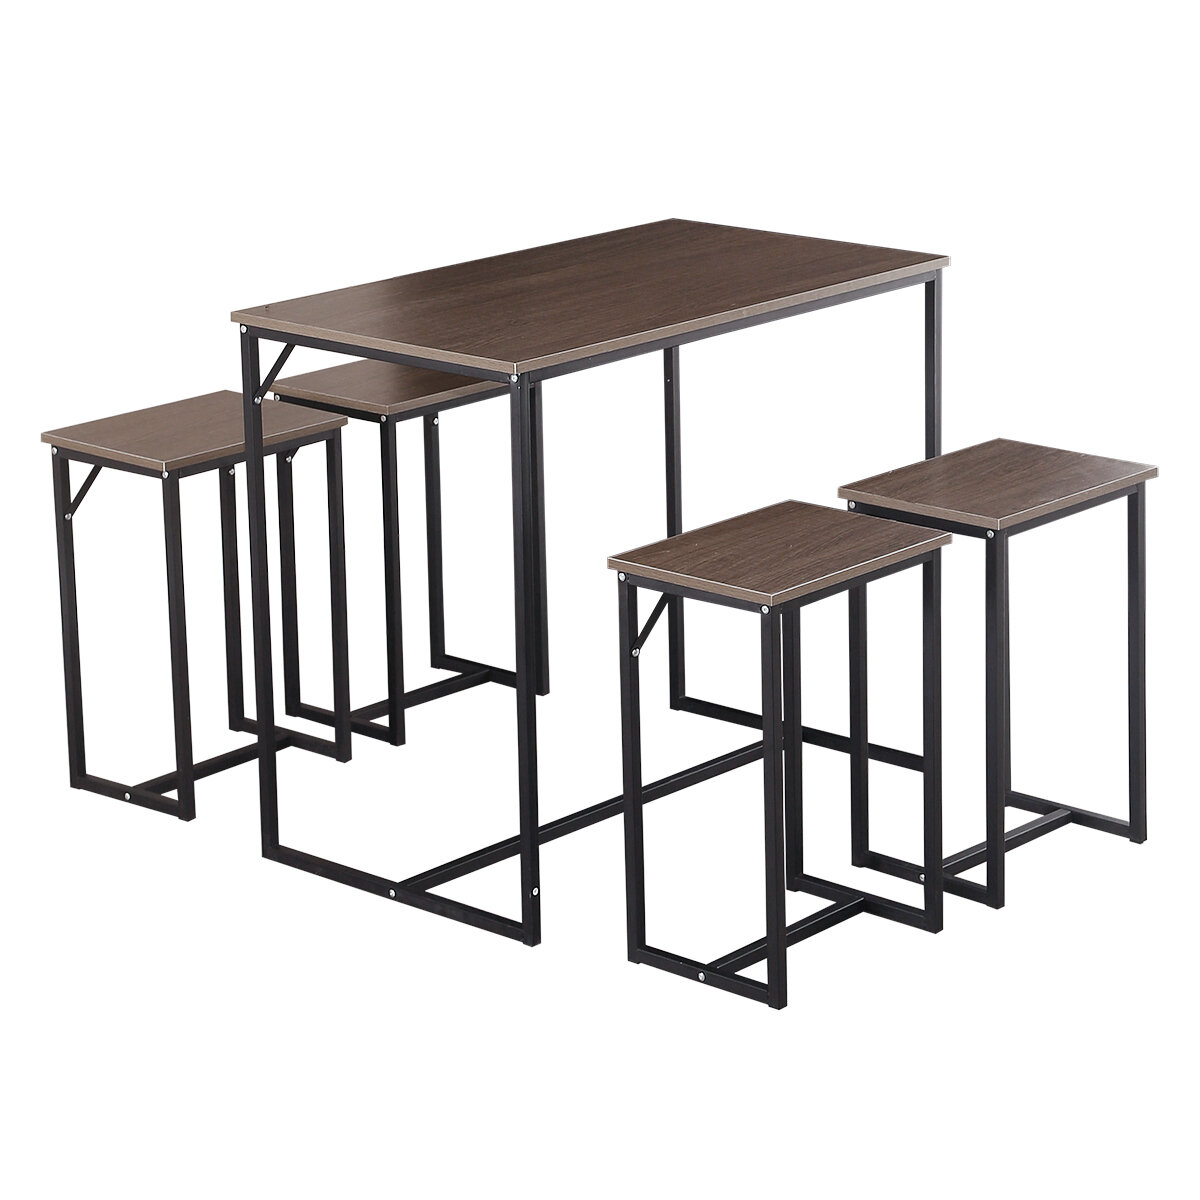 Image of Snailhome 5 Piece Dining Table Set Counter Height Pub Table and 4 Stools Set for Small Space in The Dining Room or Kitch